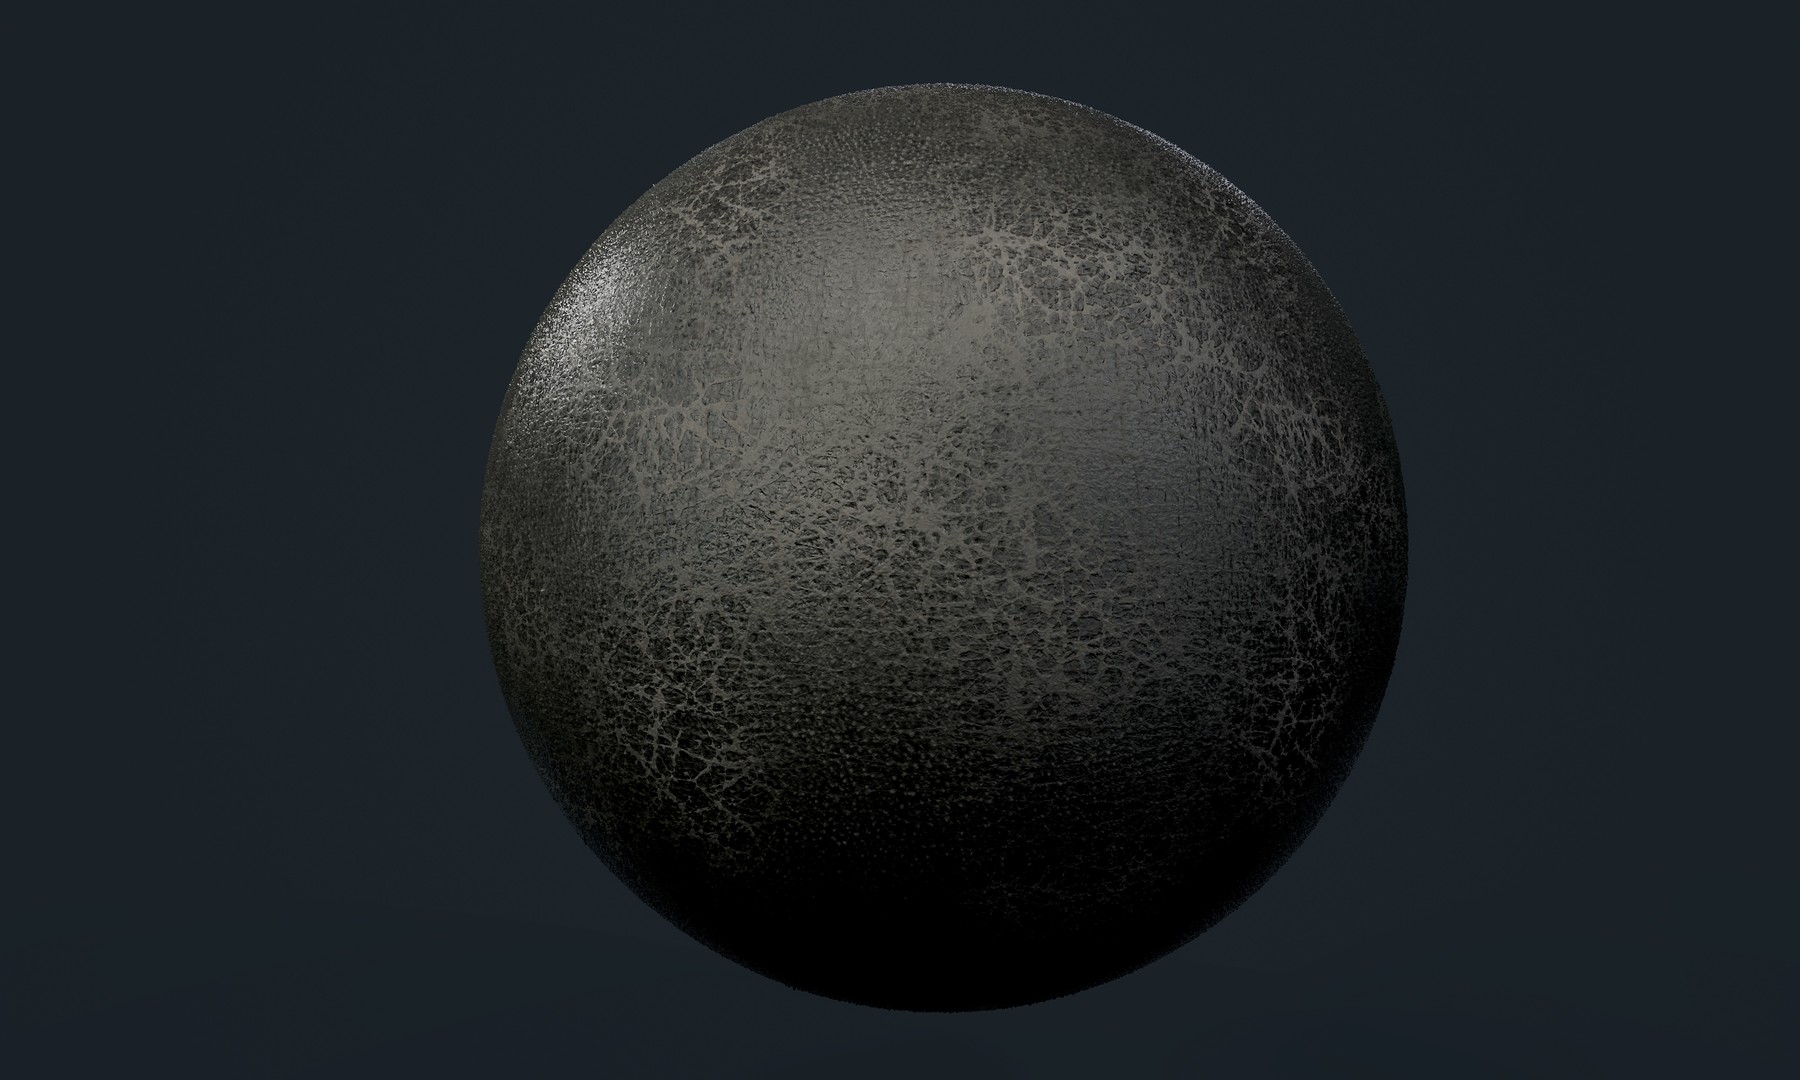 leather pbr texture